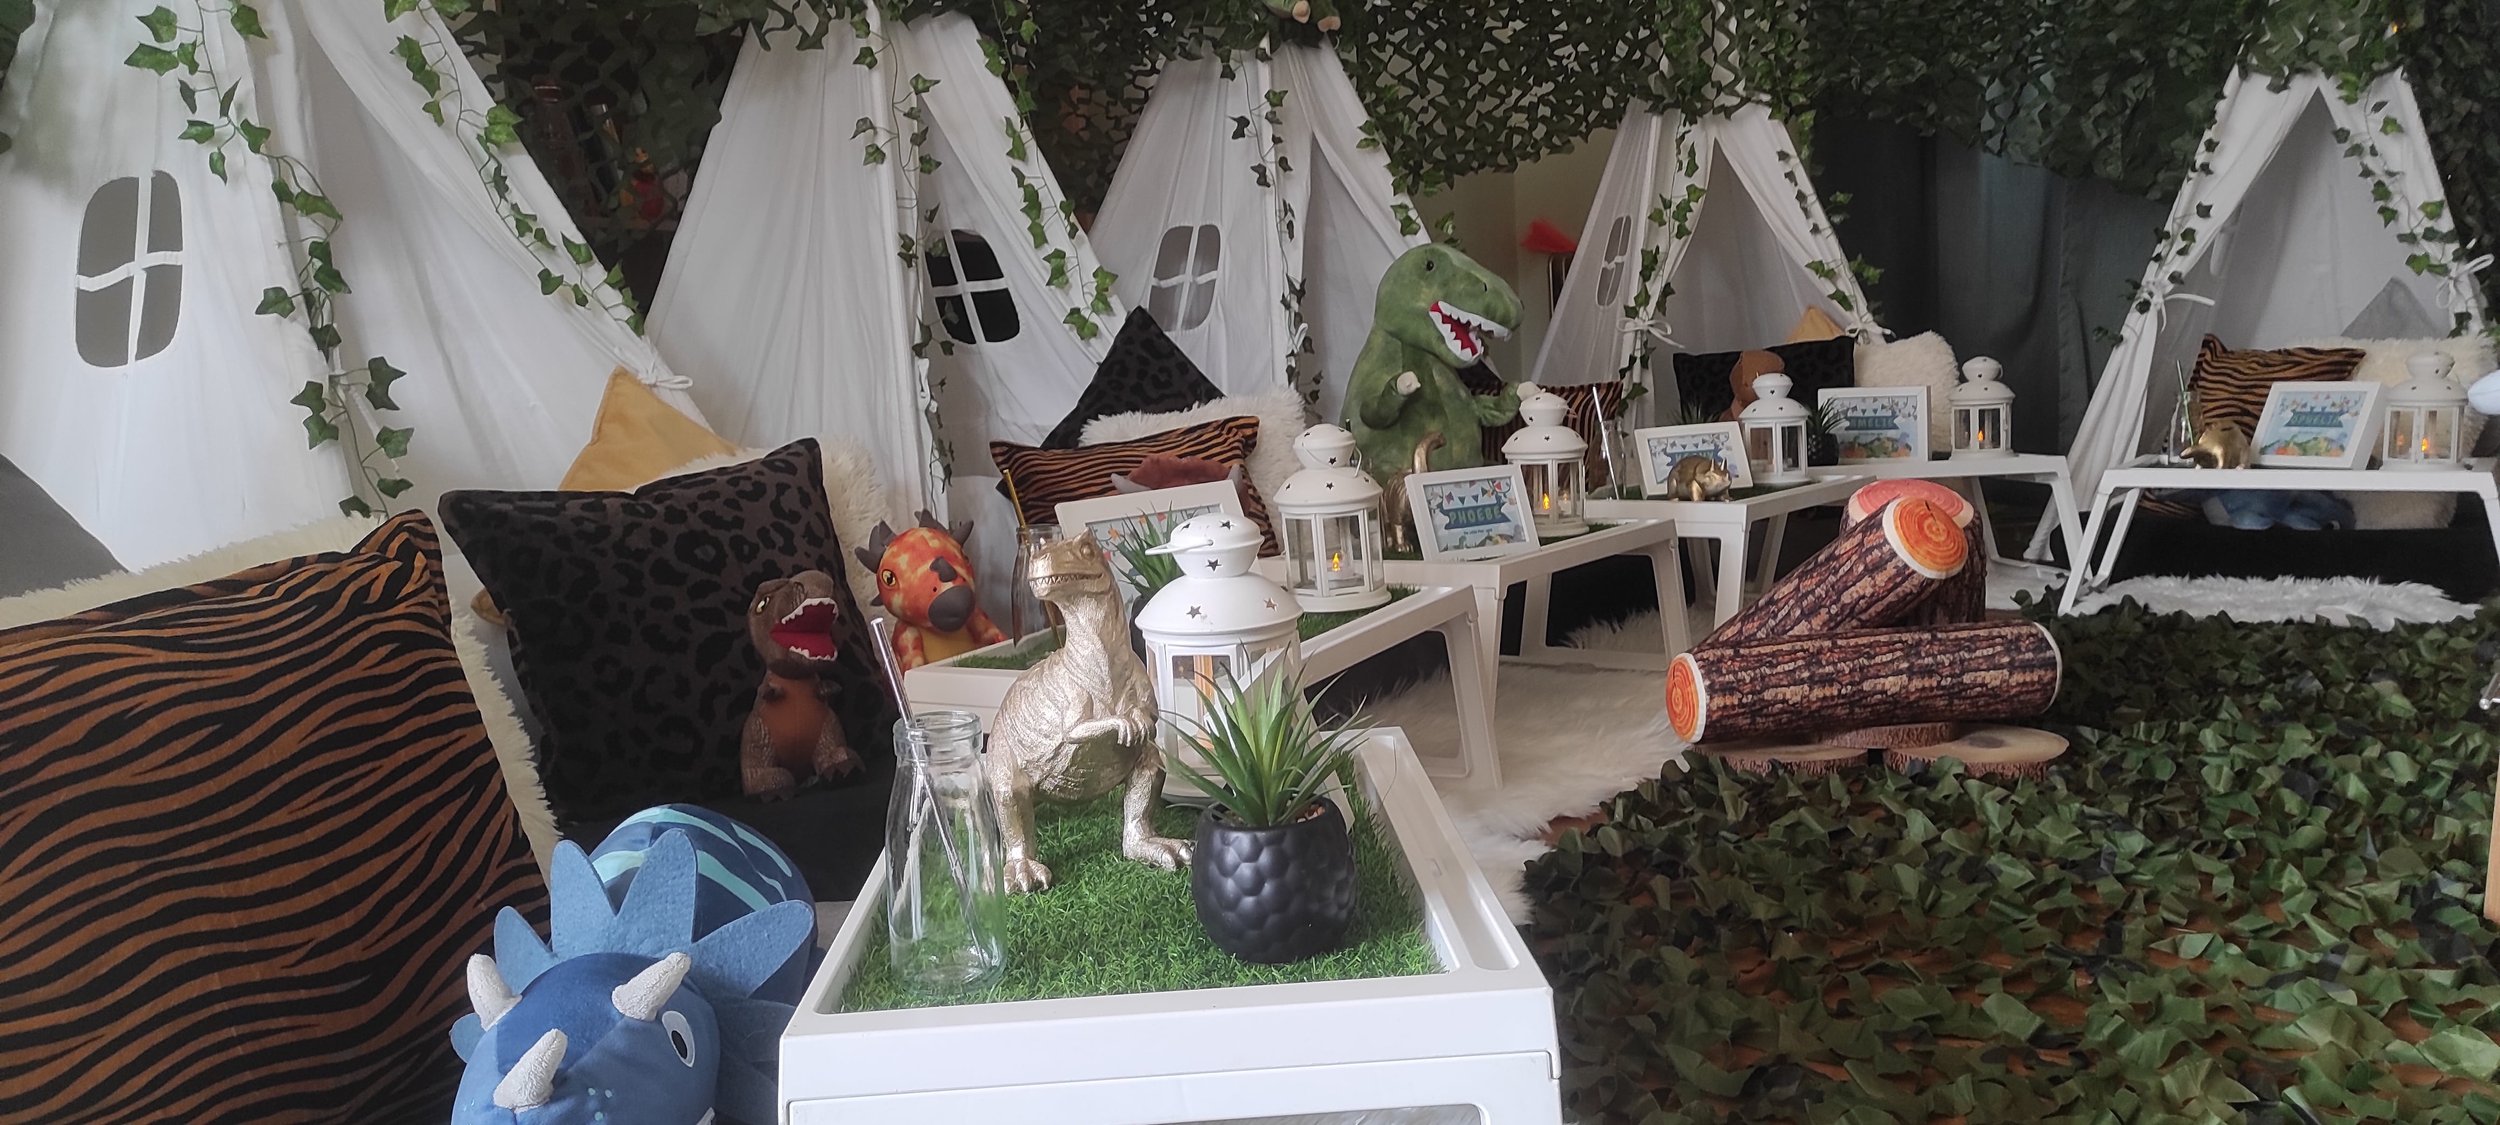 The Little Pineapple Parties - Sleepover Party Tents in Buckinghamshire